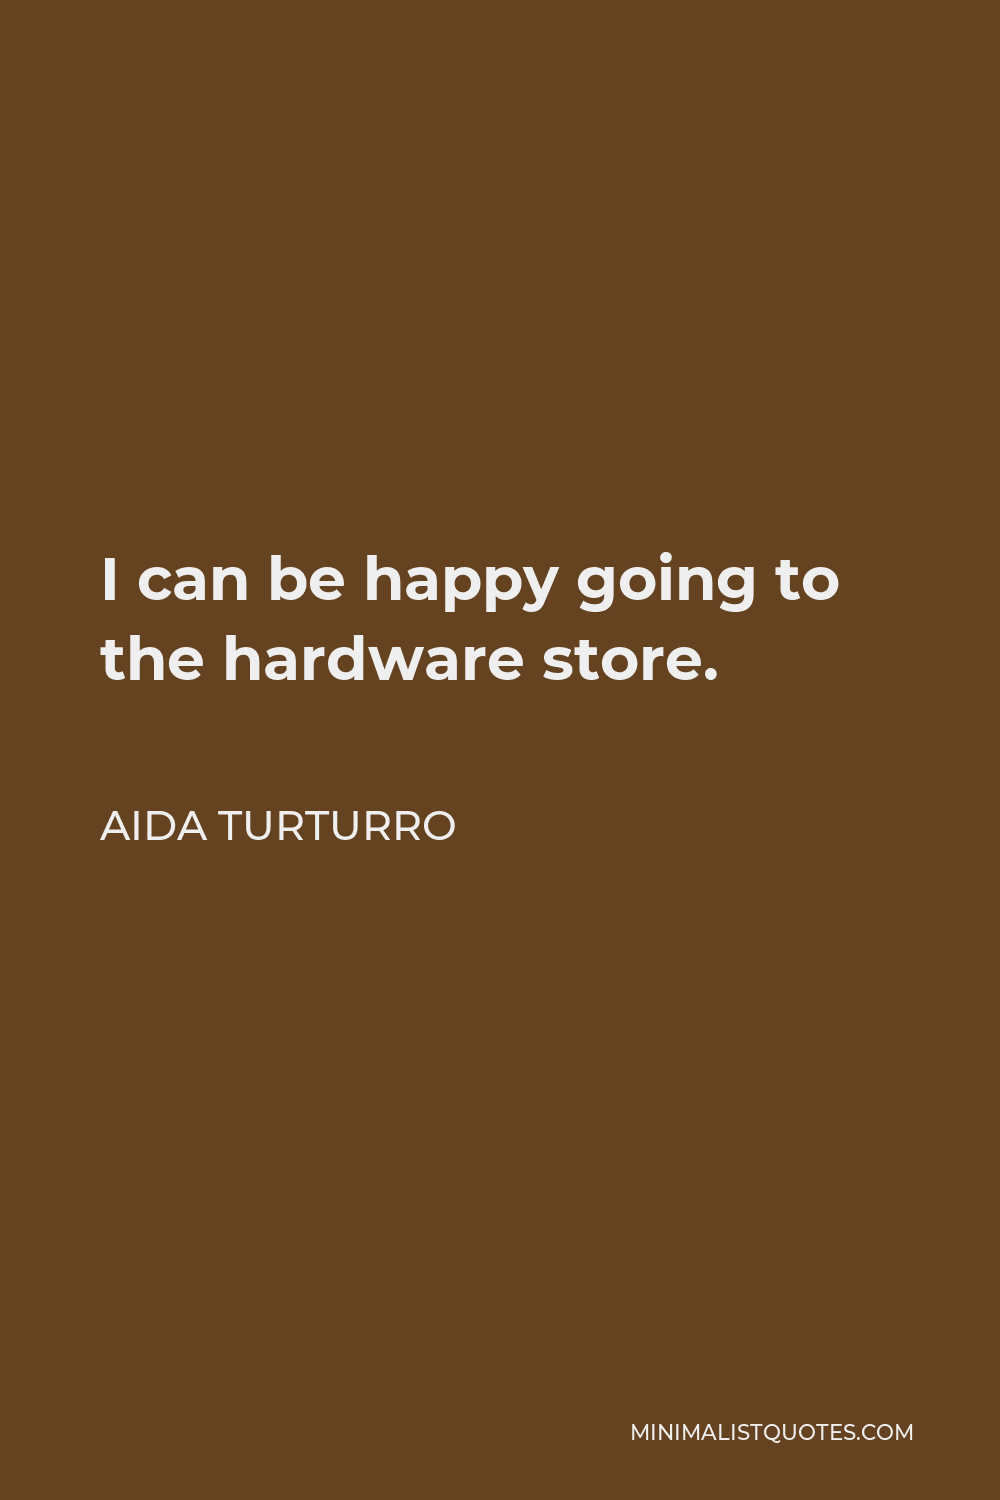 Aida Turturro Quote - I can be happy going to the hardware store.